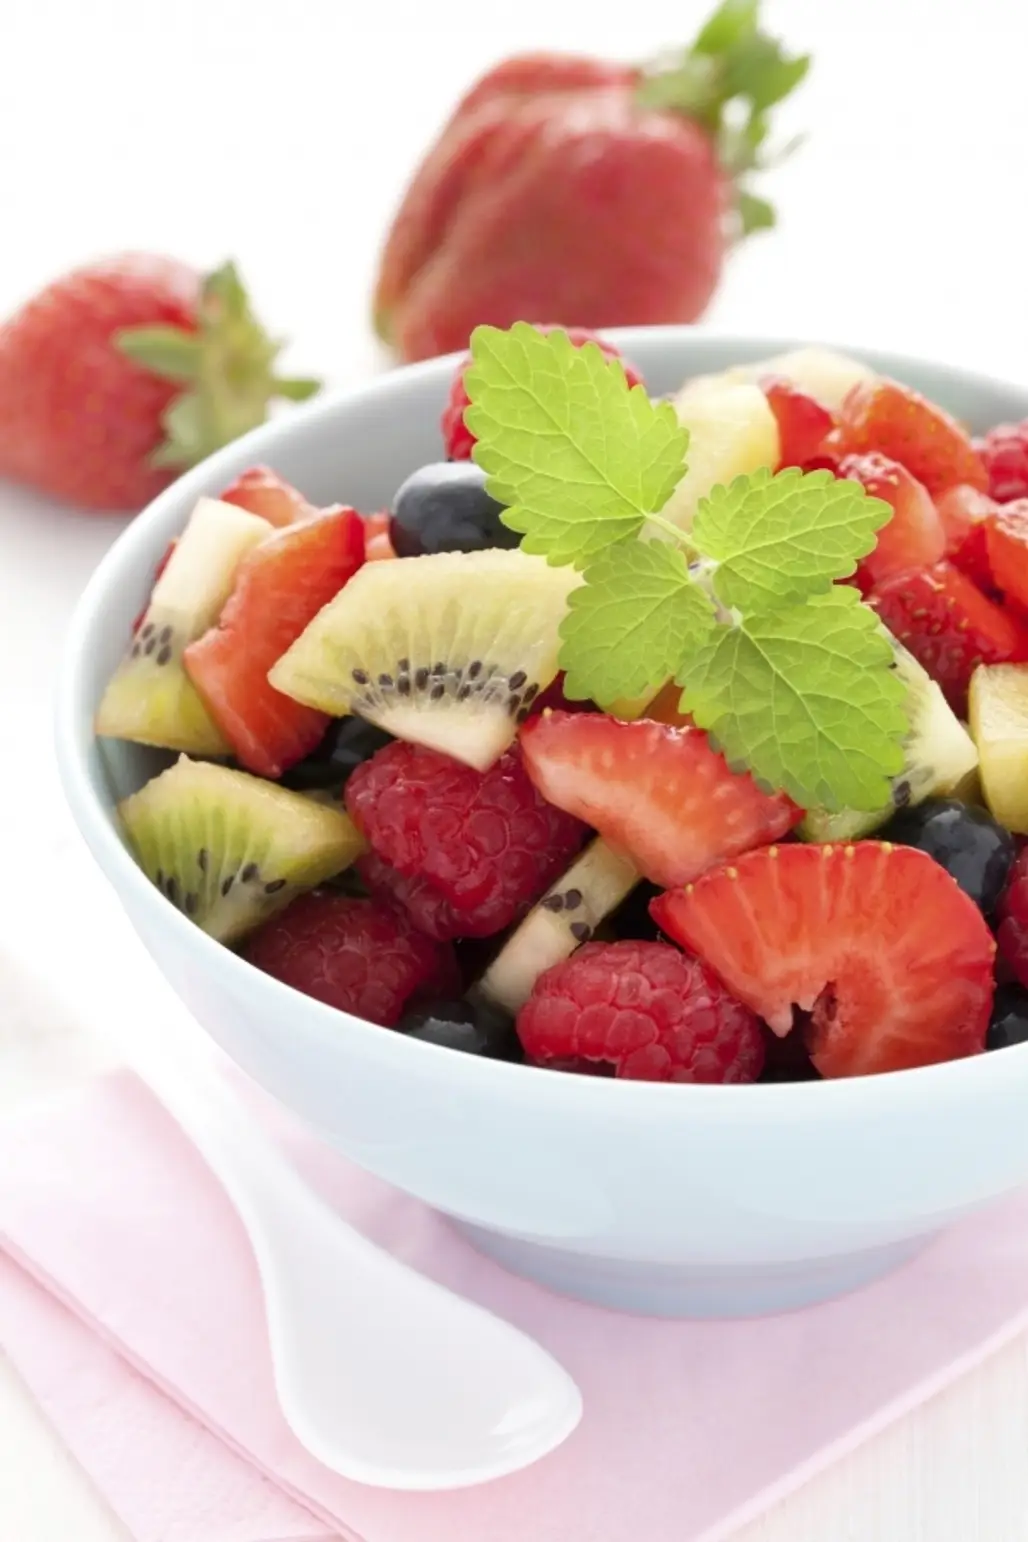 Tropical Fruit Salad with Cacao Nibs